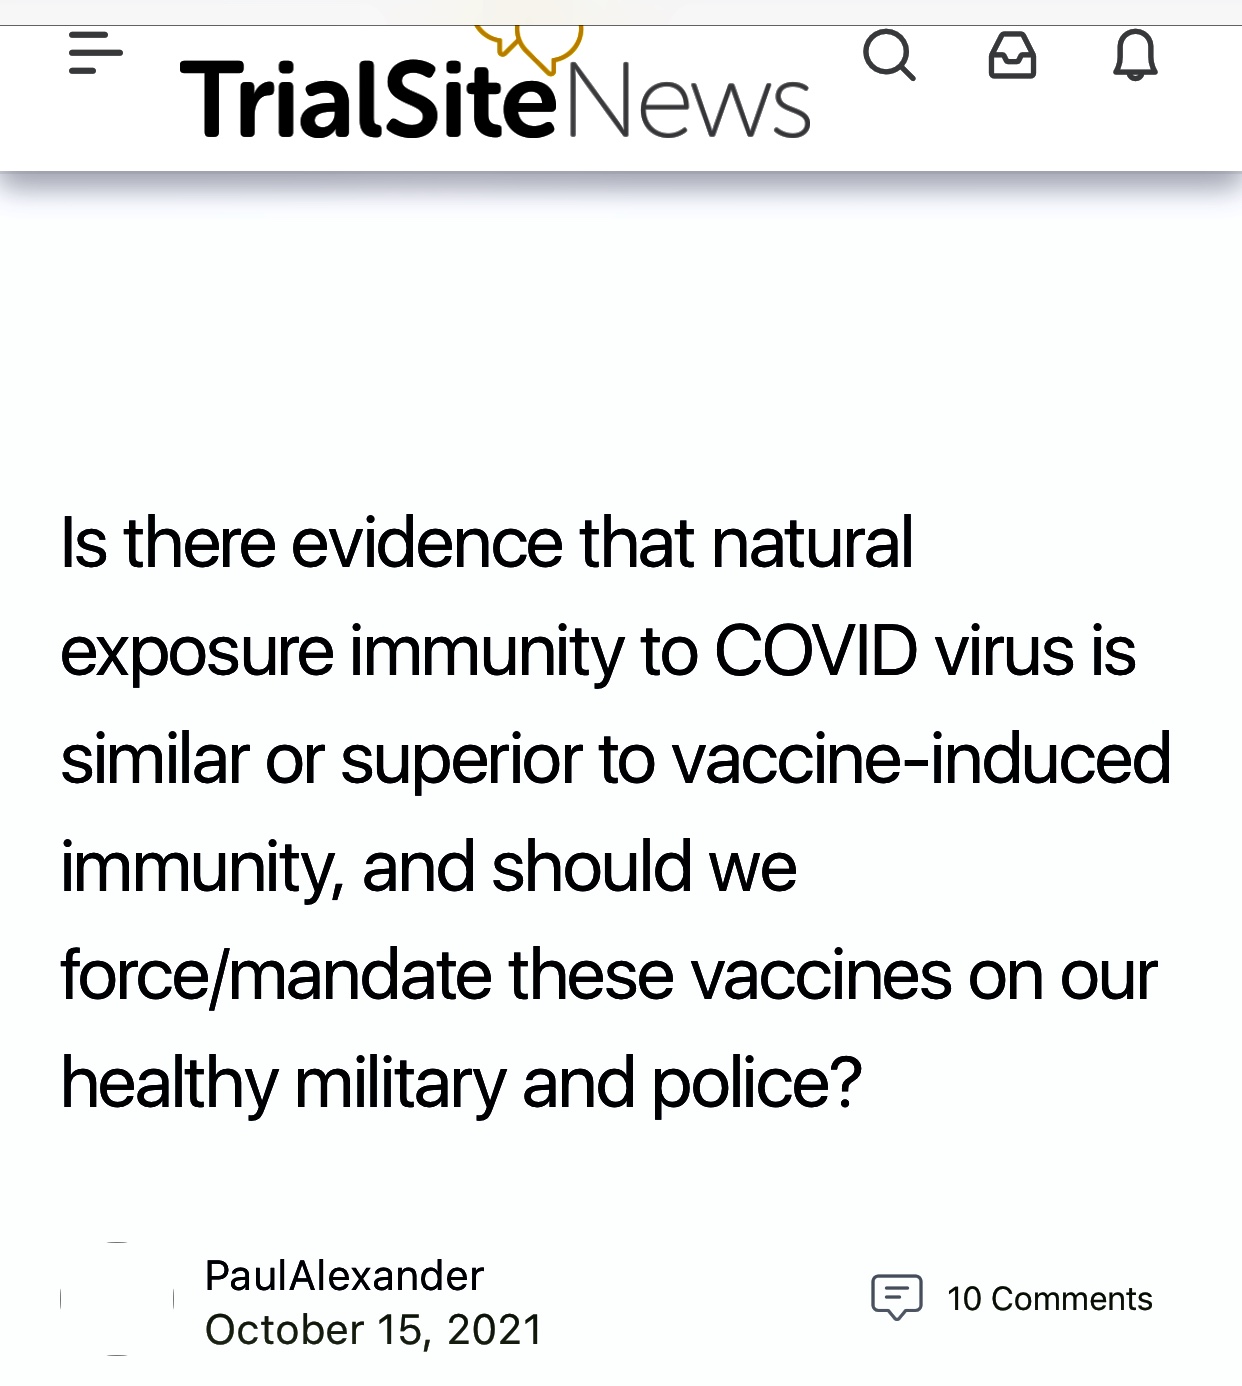 🚨🚨🚨Natural Exposure Immunity to COVID is Superior to Vaccine, Biden & Pentagon Should Not Mandate Vaccines on Military, Police, Americans?